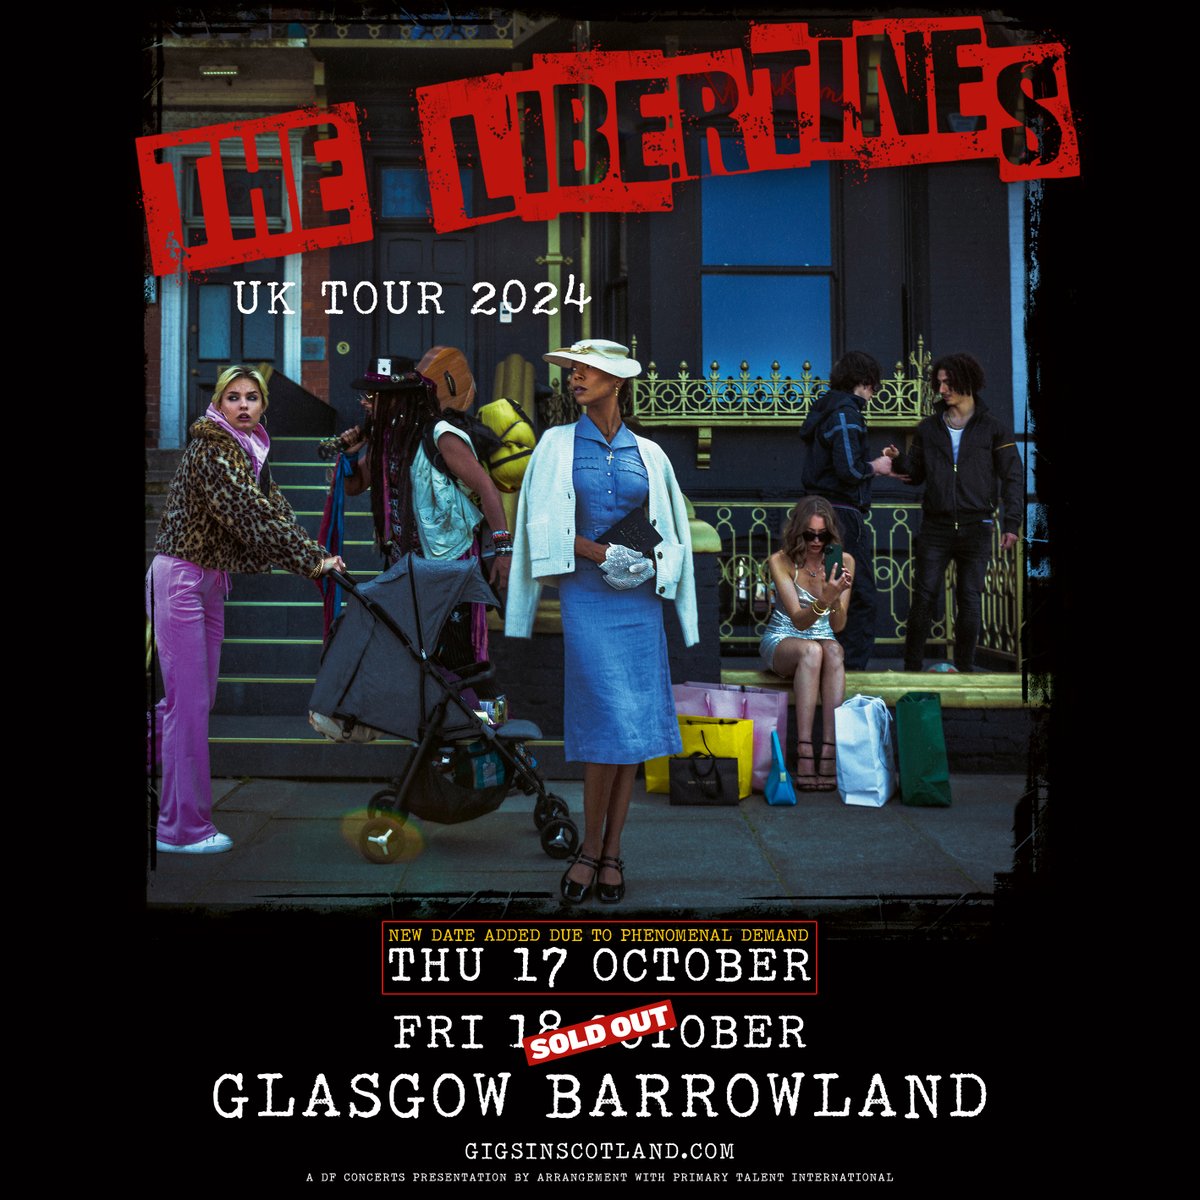 EXTRA DATE ADDED » Due to phenomenal demand, @libertines have added an additional night at @TheBarrowlands on Thursday 17th October 👀🎸 TICKETS ON SALE NOW ⇾ gigss.co/the-libertines